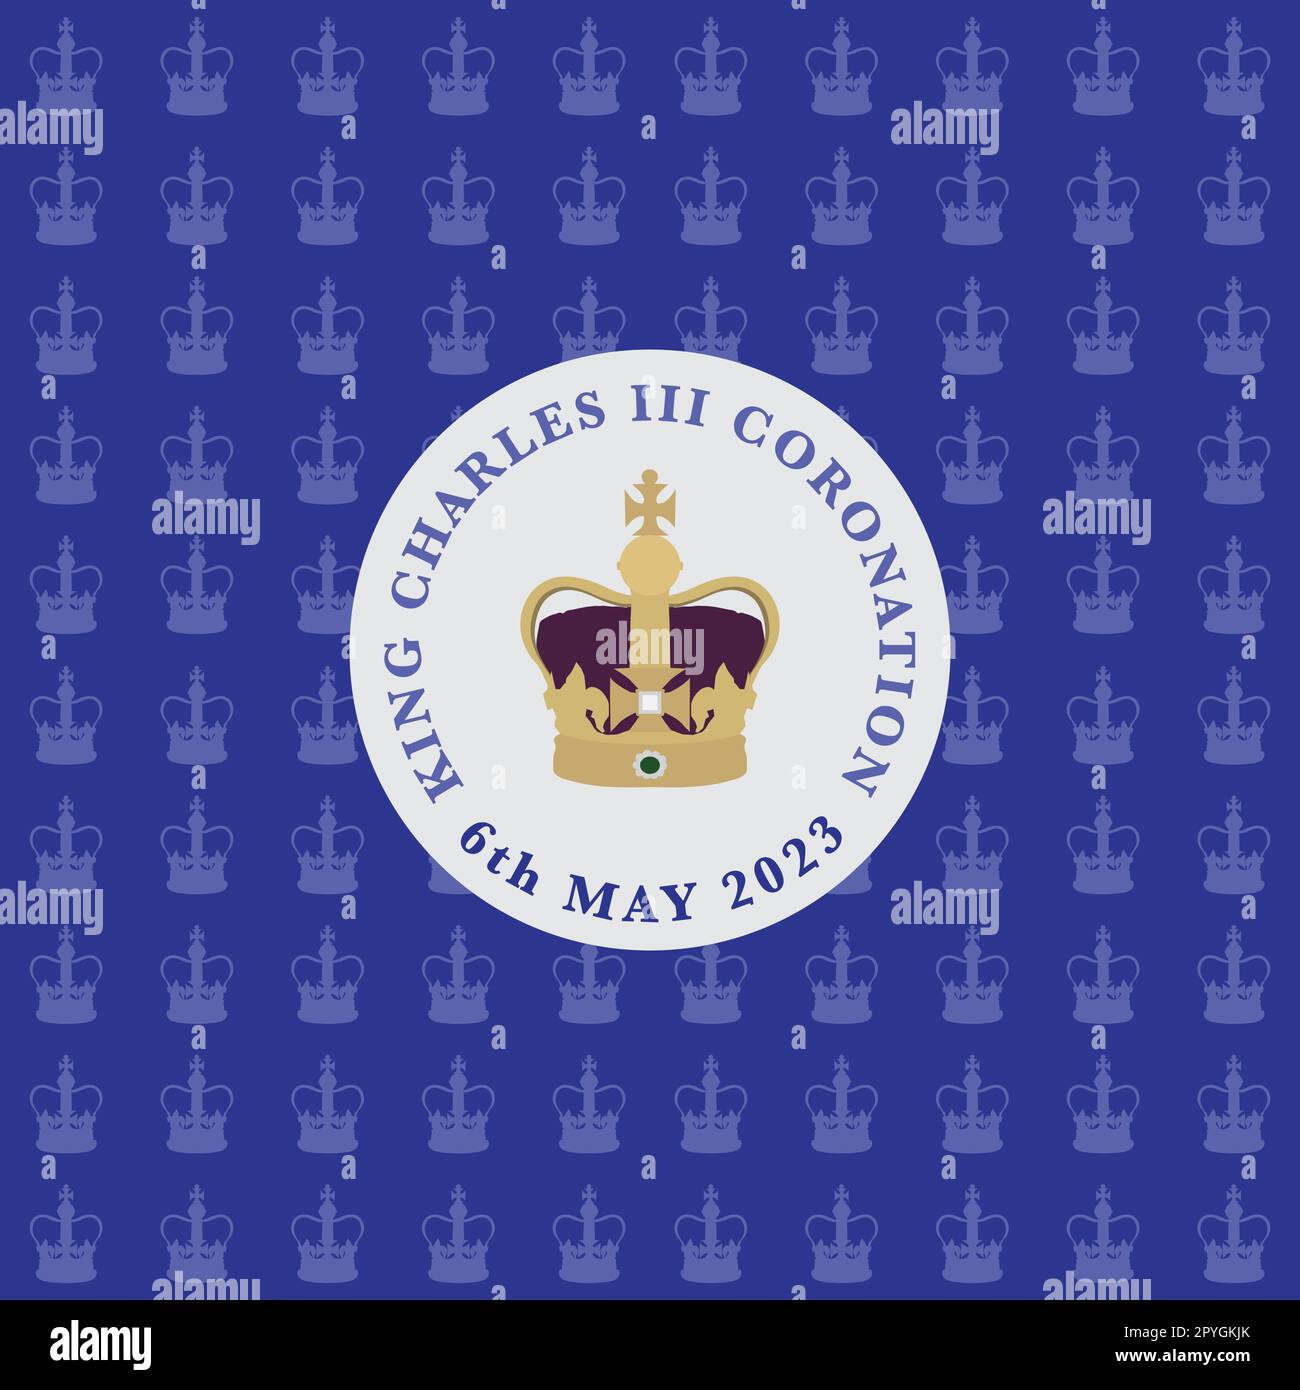 Coronation 6th May 2023 vector illustration on a blue crown pattern background Stock Vector